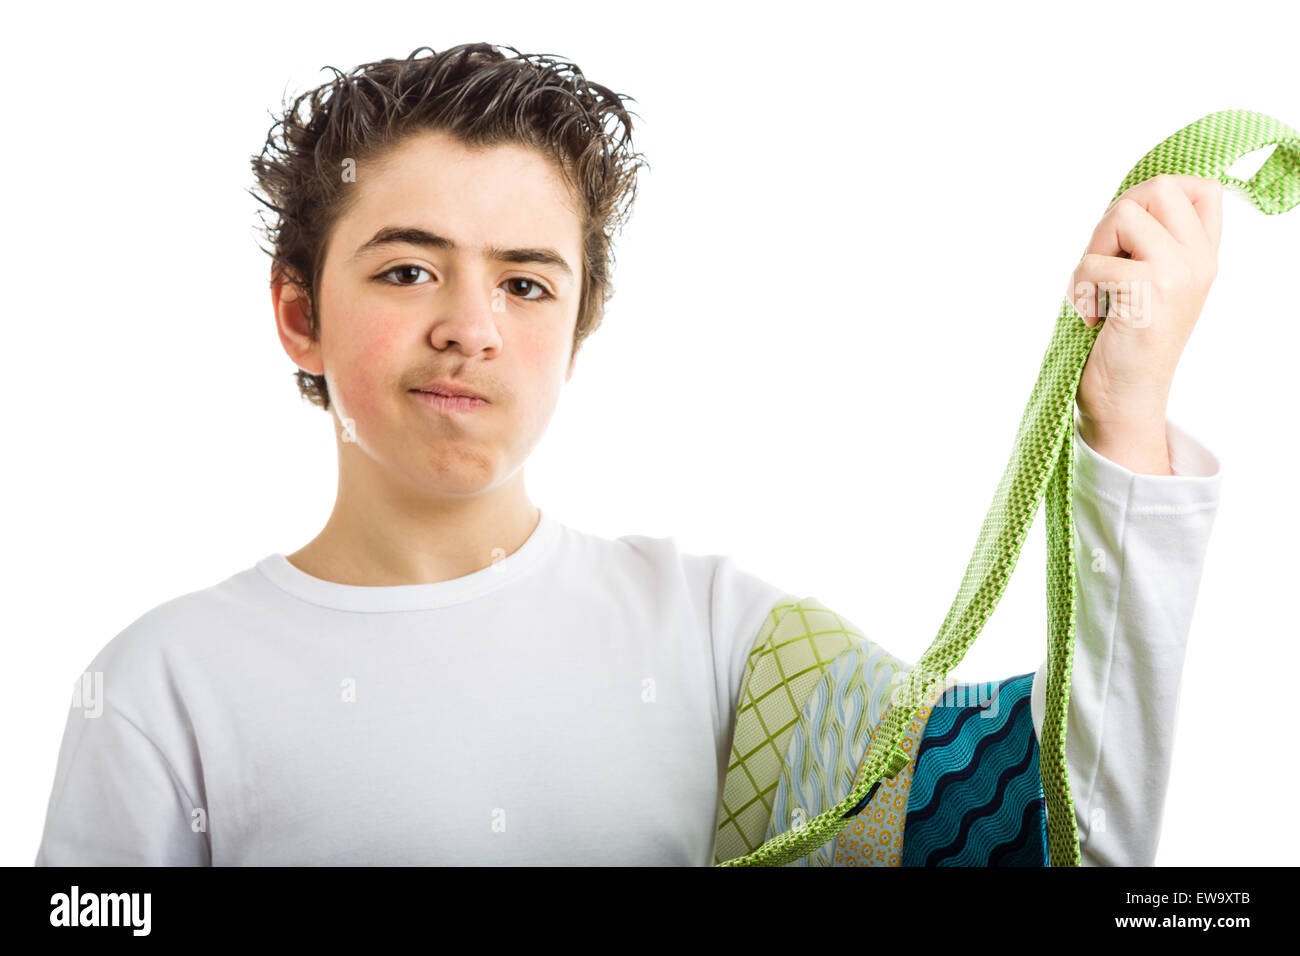 Puzzled hispanic boy in white long sleeved shirt smiles holding some extravagant and tawdry green ties Stock Photo